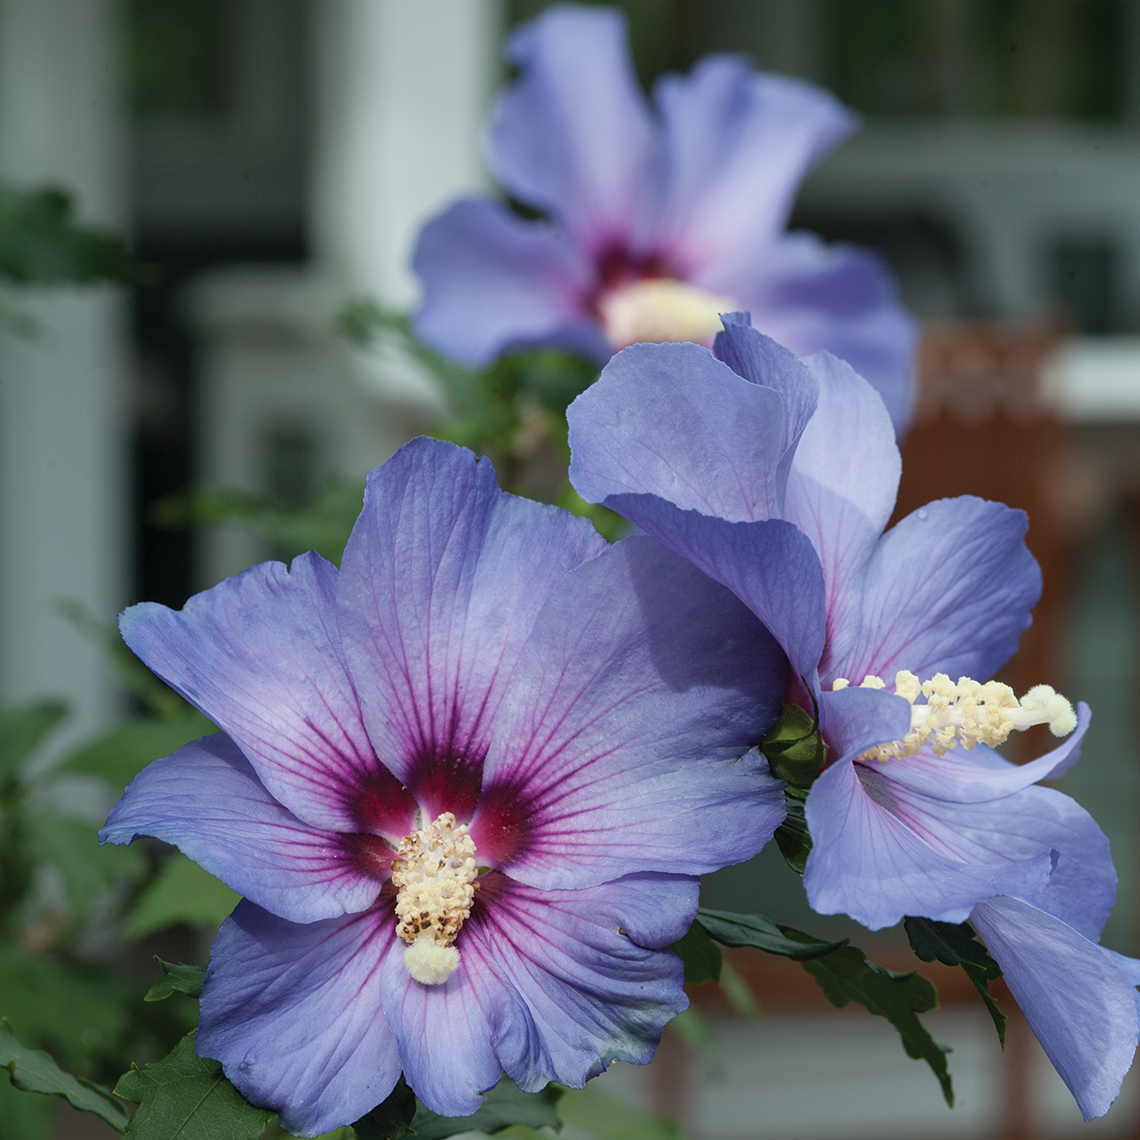 Three flowers of Azurri Blue Satin rose of Sharon showing their blue color and red eye in the center